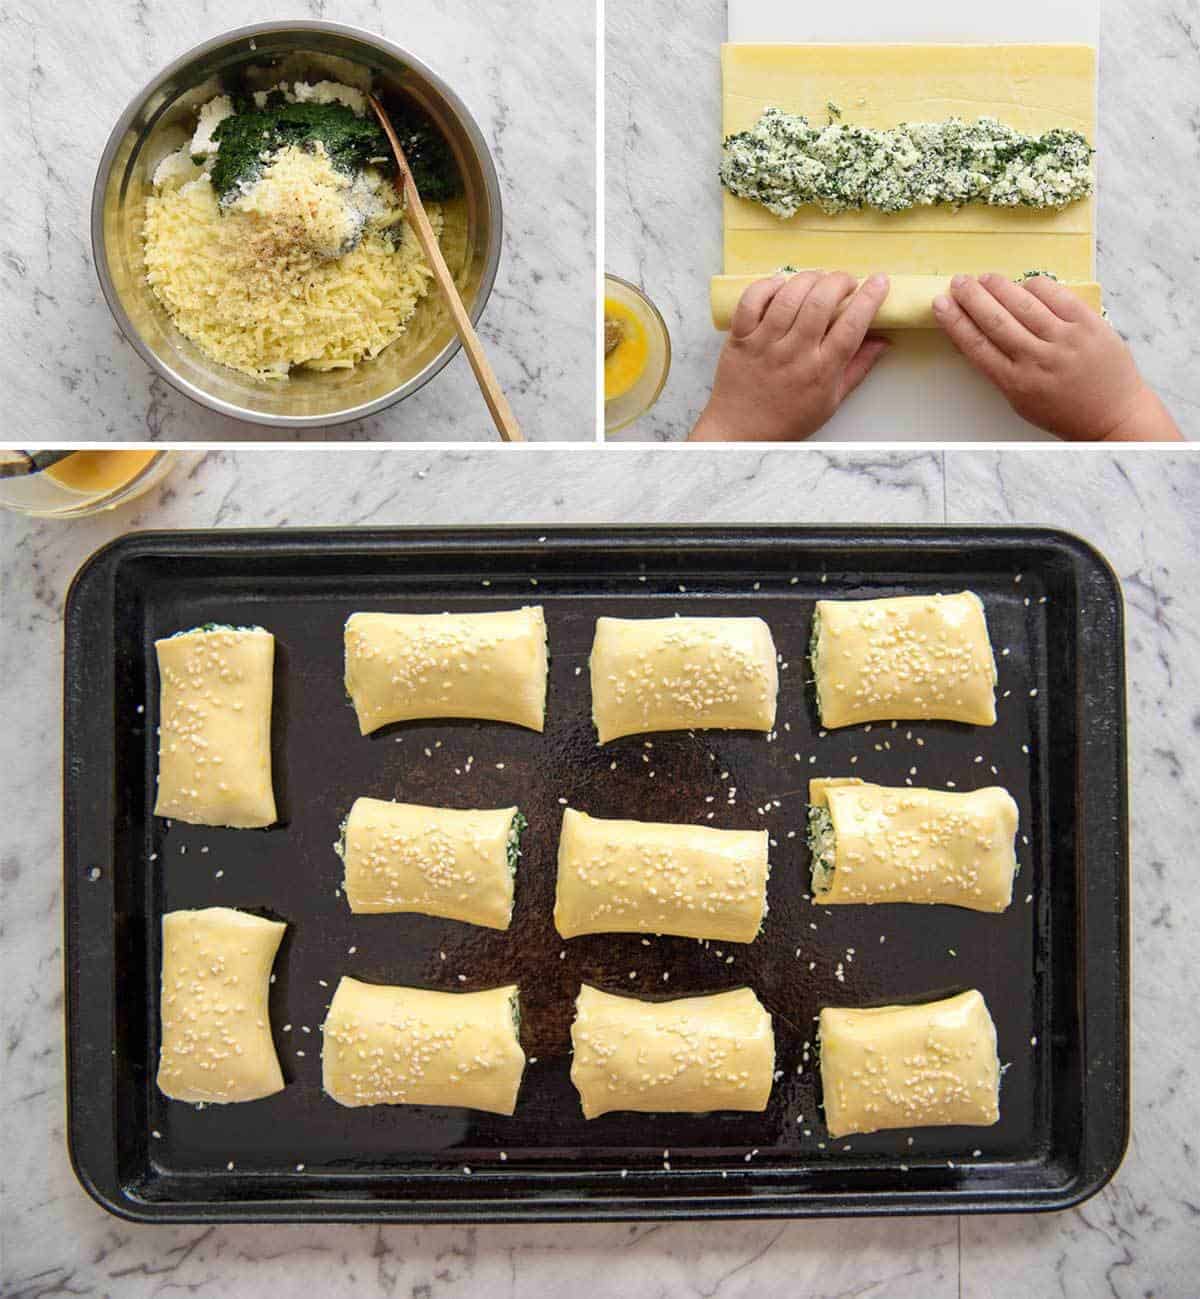 Spinach and Ricotta Rolls - a moist cheesy filling enclosed with buttery flaky puff pastry. Great make ahead for freezing! www.recipetineats.com